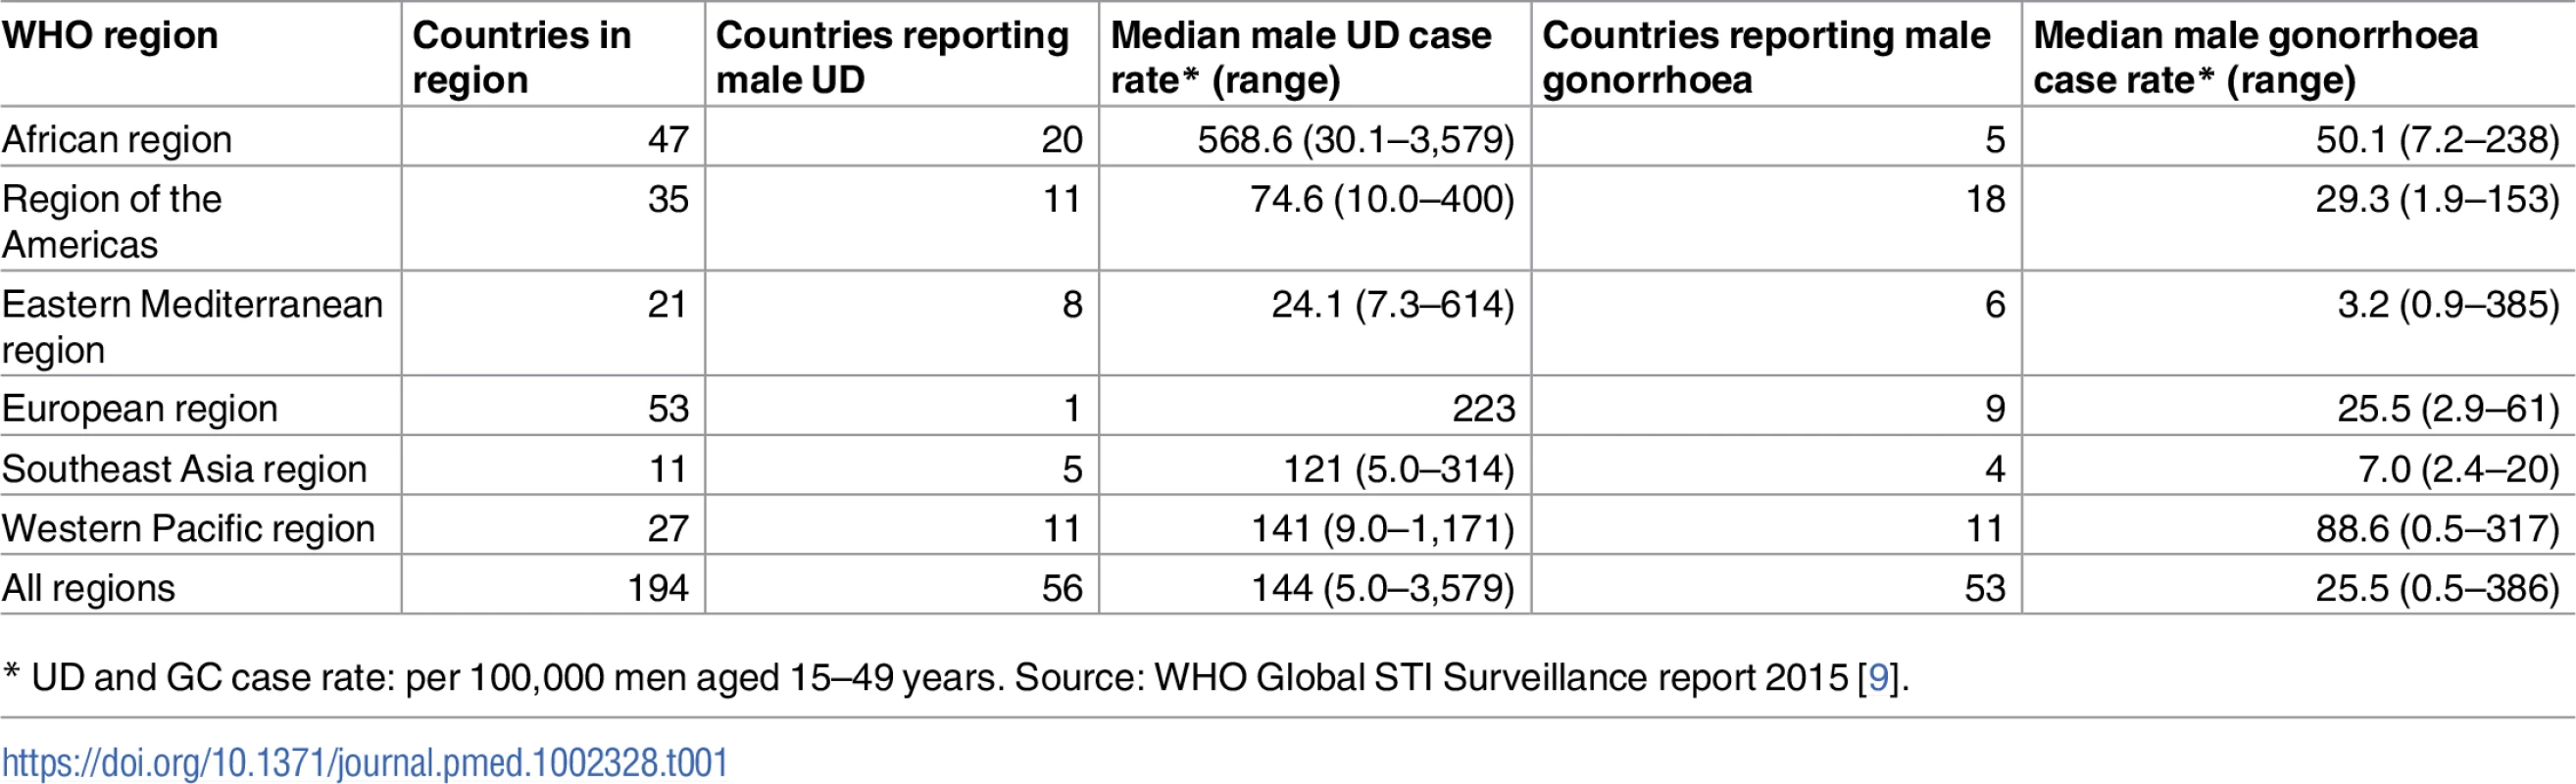 Male urethral discharge (UD) rate and male gonorrhoea case reporting rates by region, 2014.